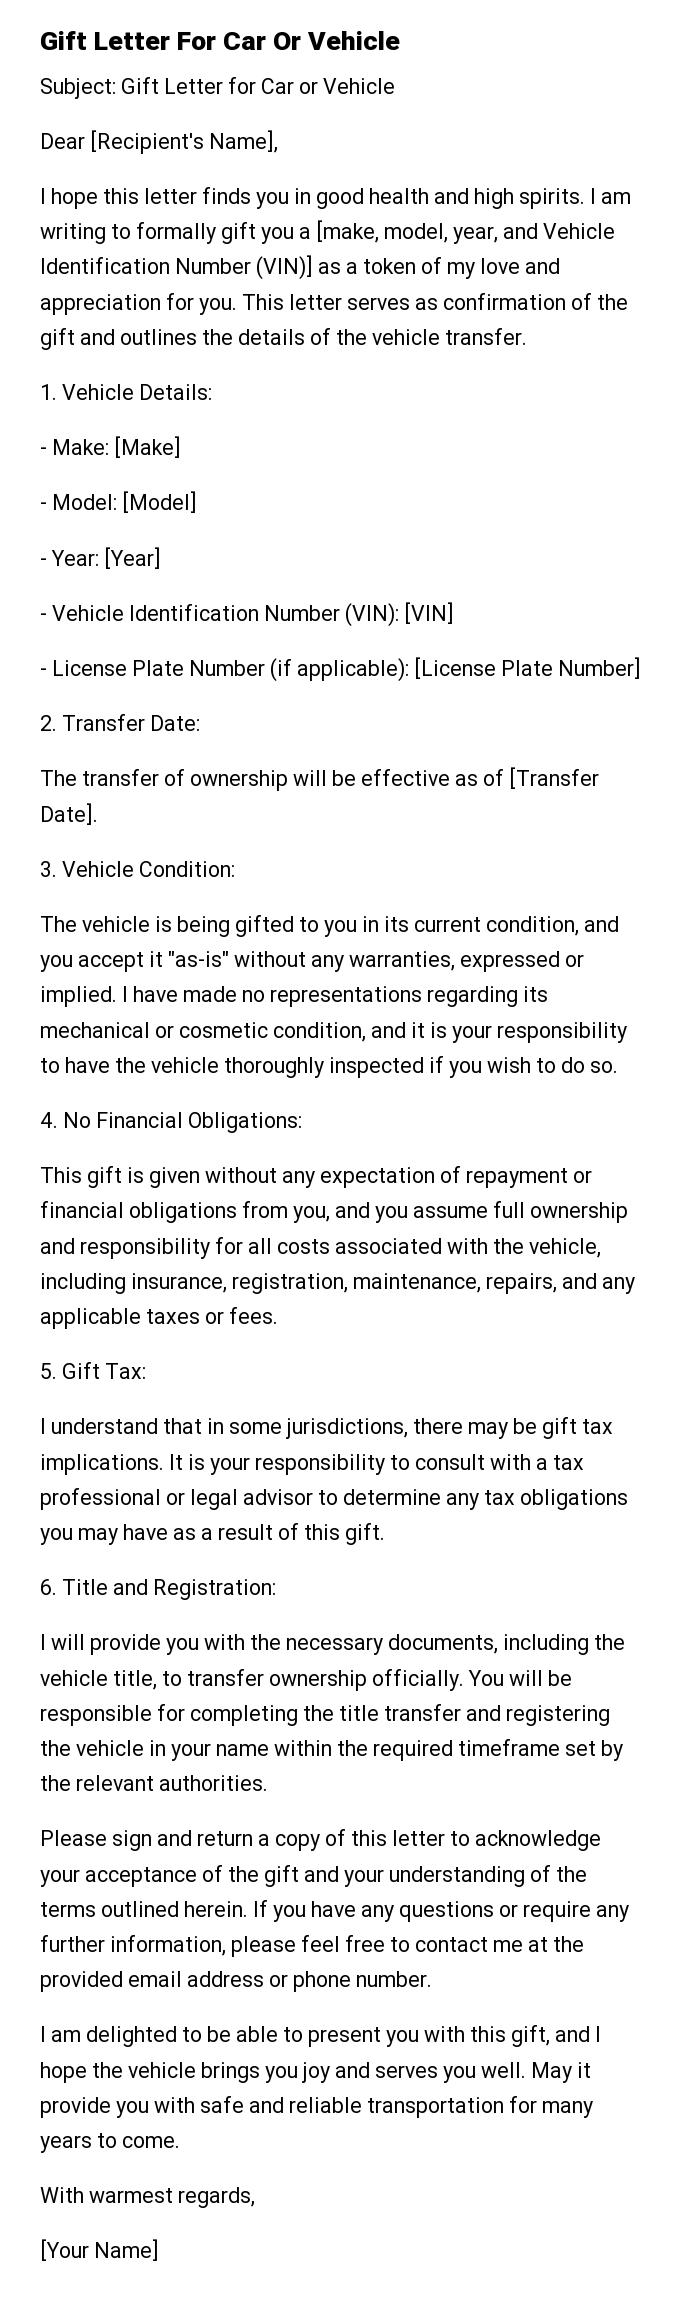 Gift Letter For Car Or Vehicle